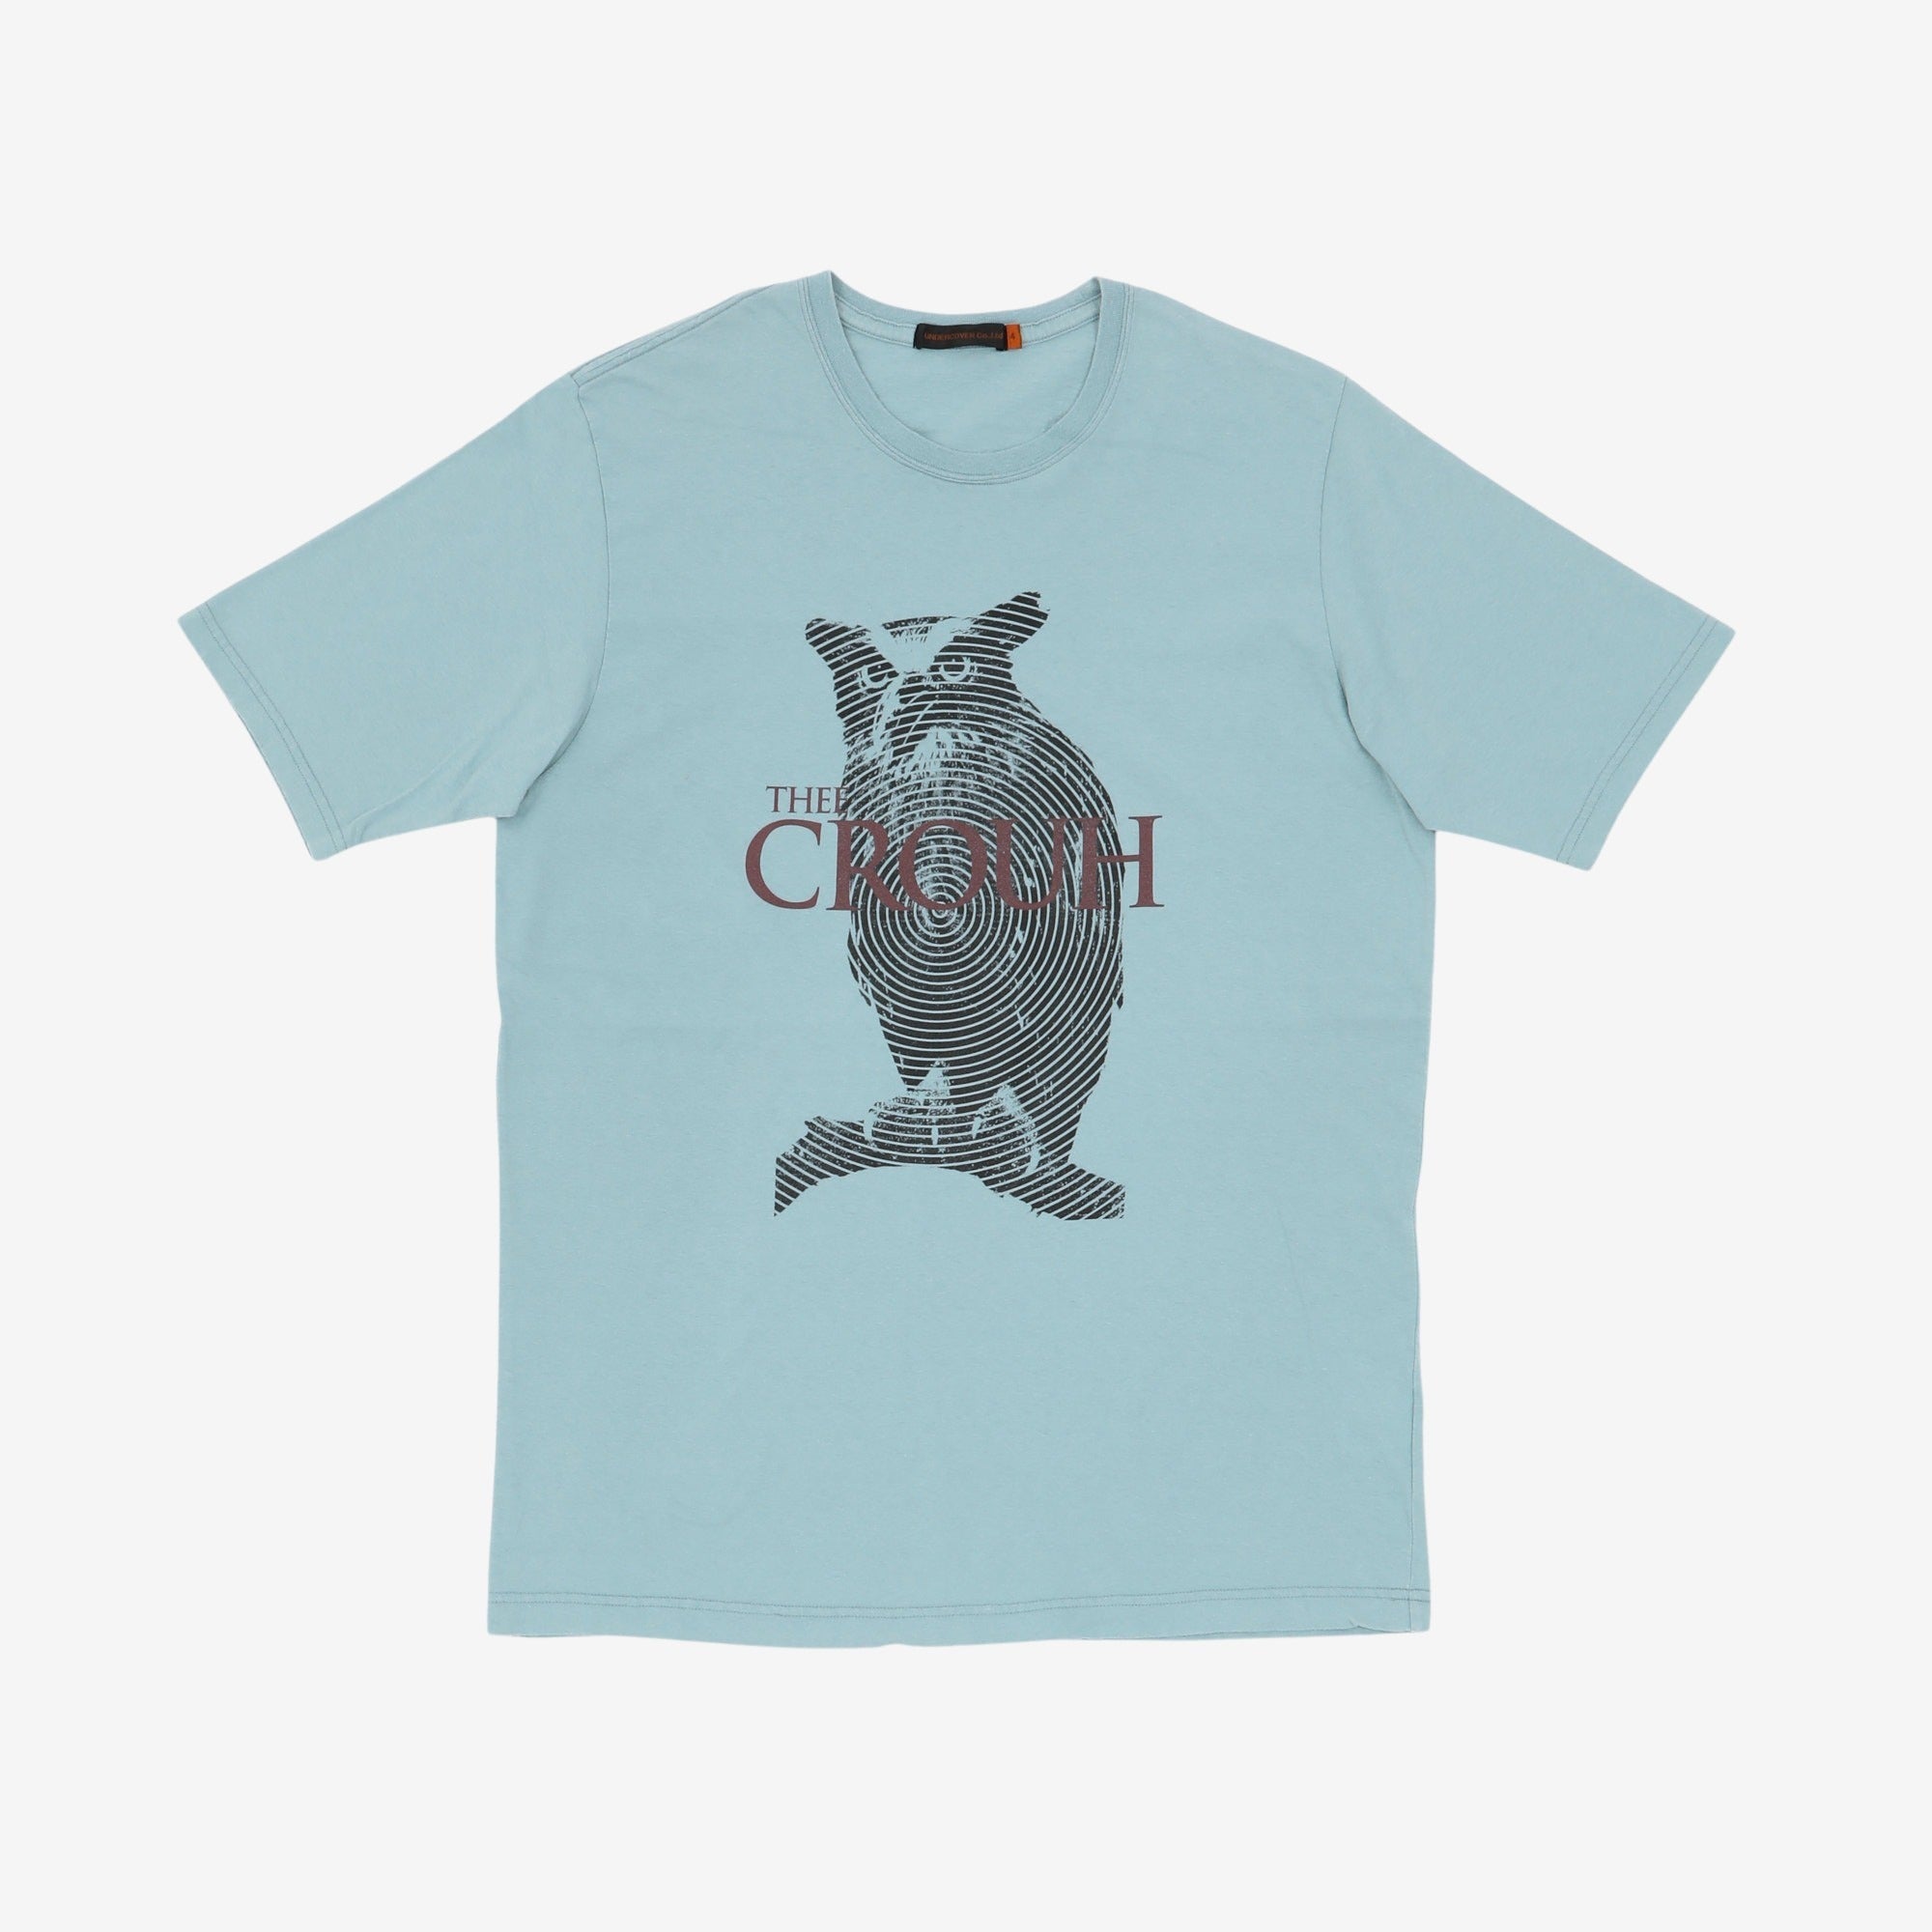 Thee Crouh T-Shirt